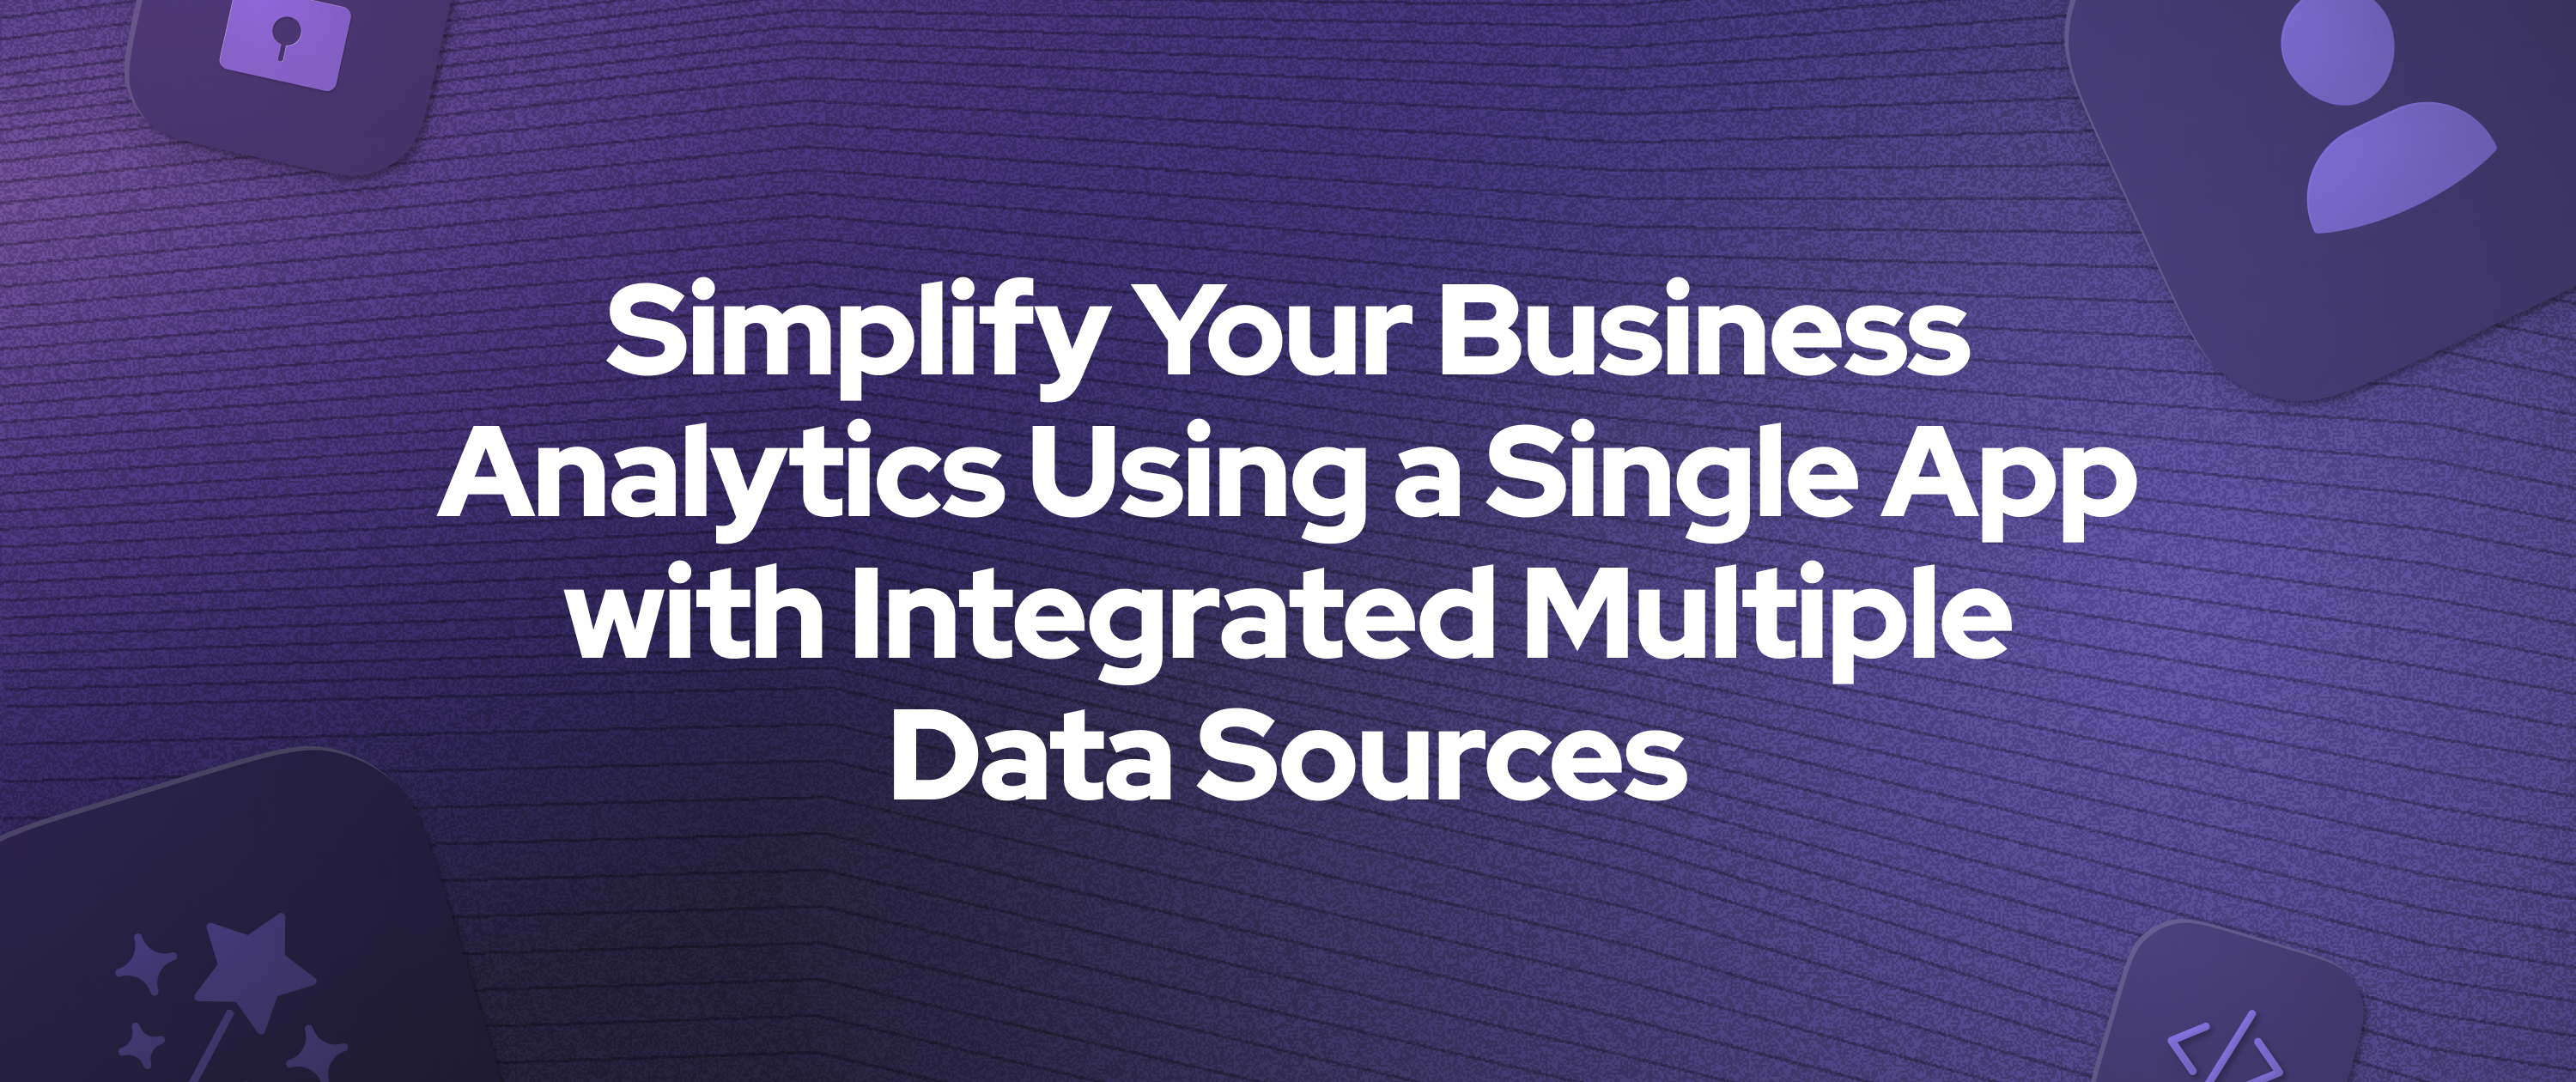 Simplify Your Business Analytics Using a Single App with Integrated Multiple Data Sources